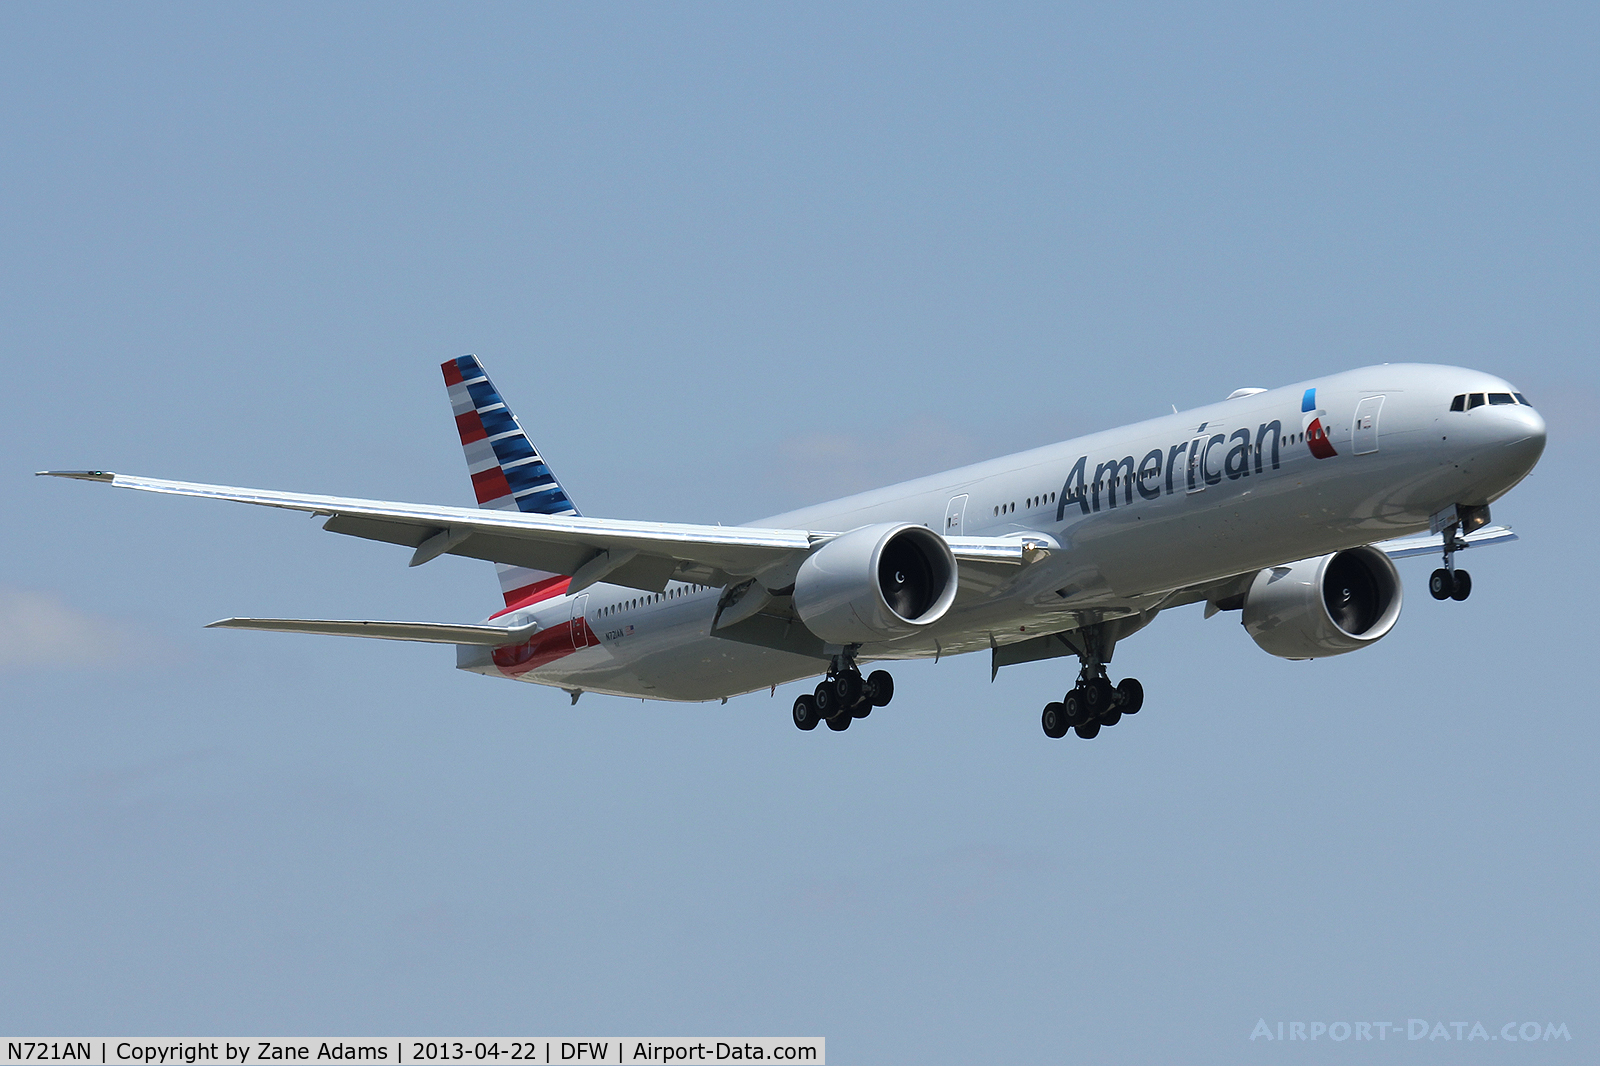 N721AN, 2013 Boeing 777-323/ER C/N 31546, American Airlines New Paint 777 at DFW Airport